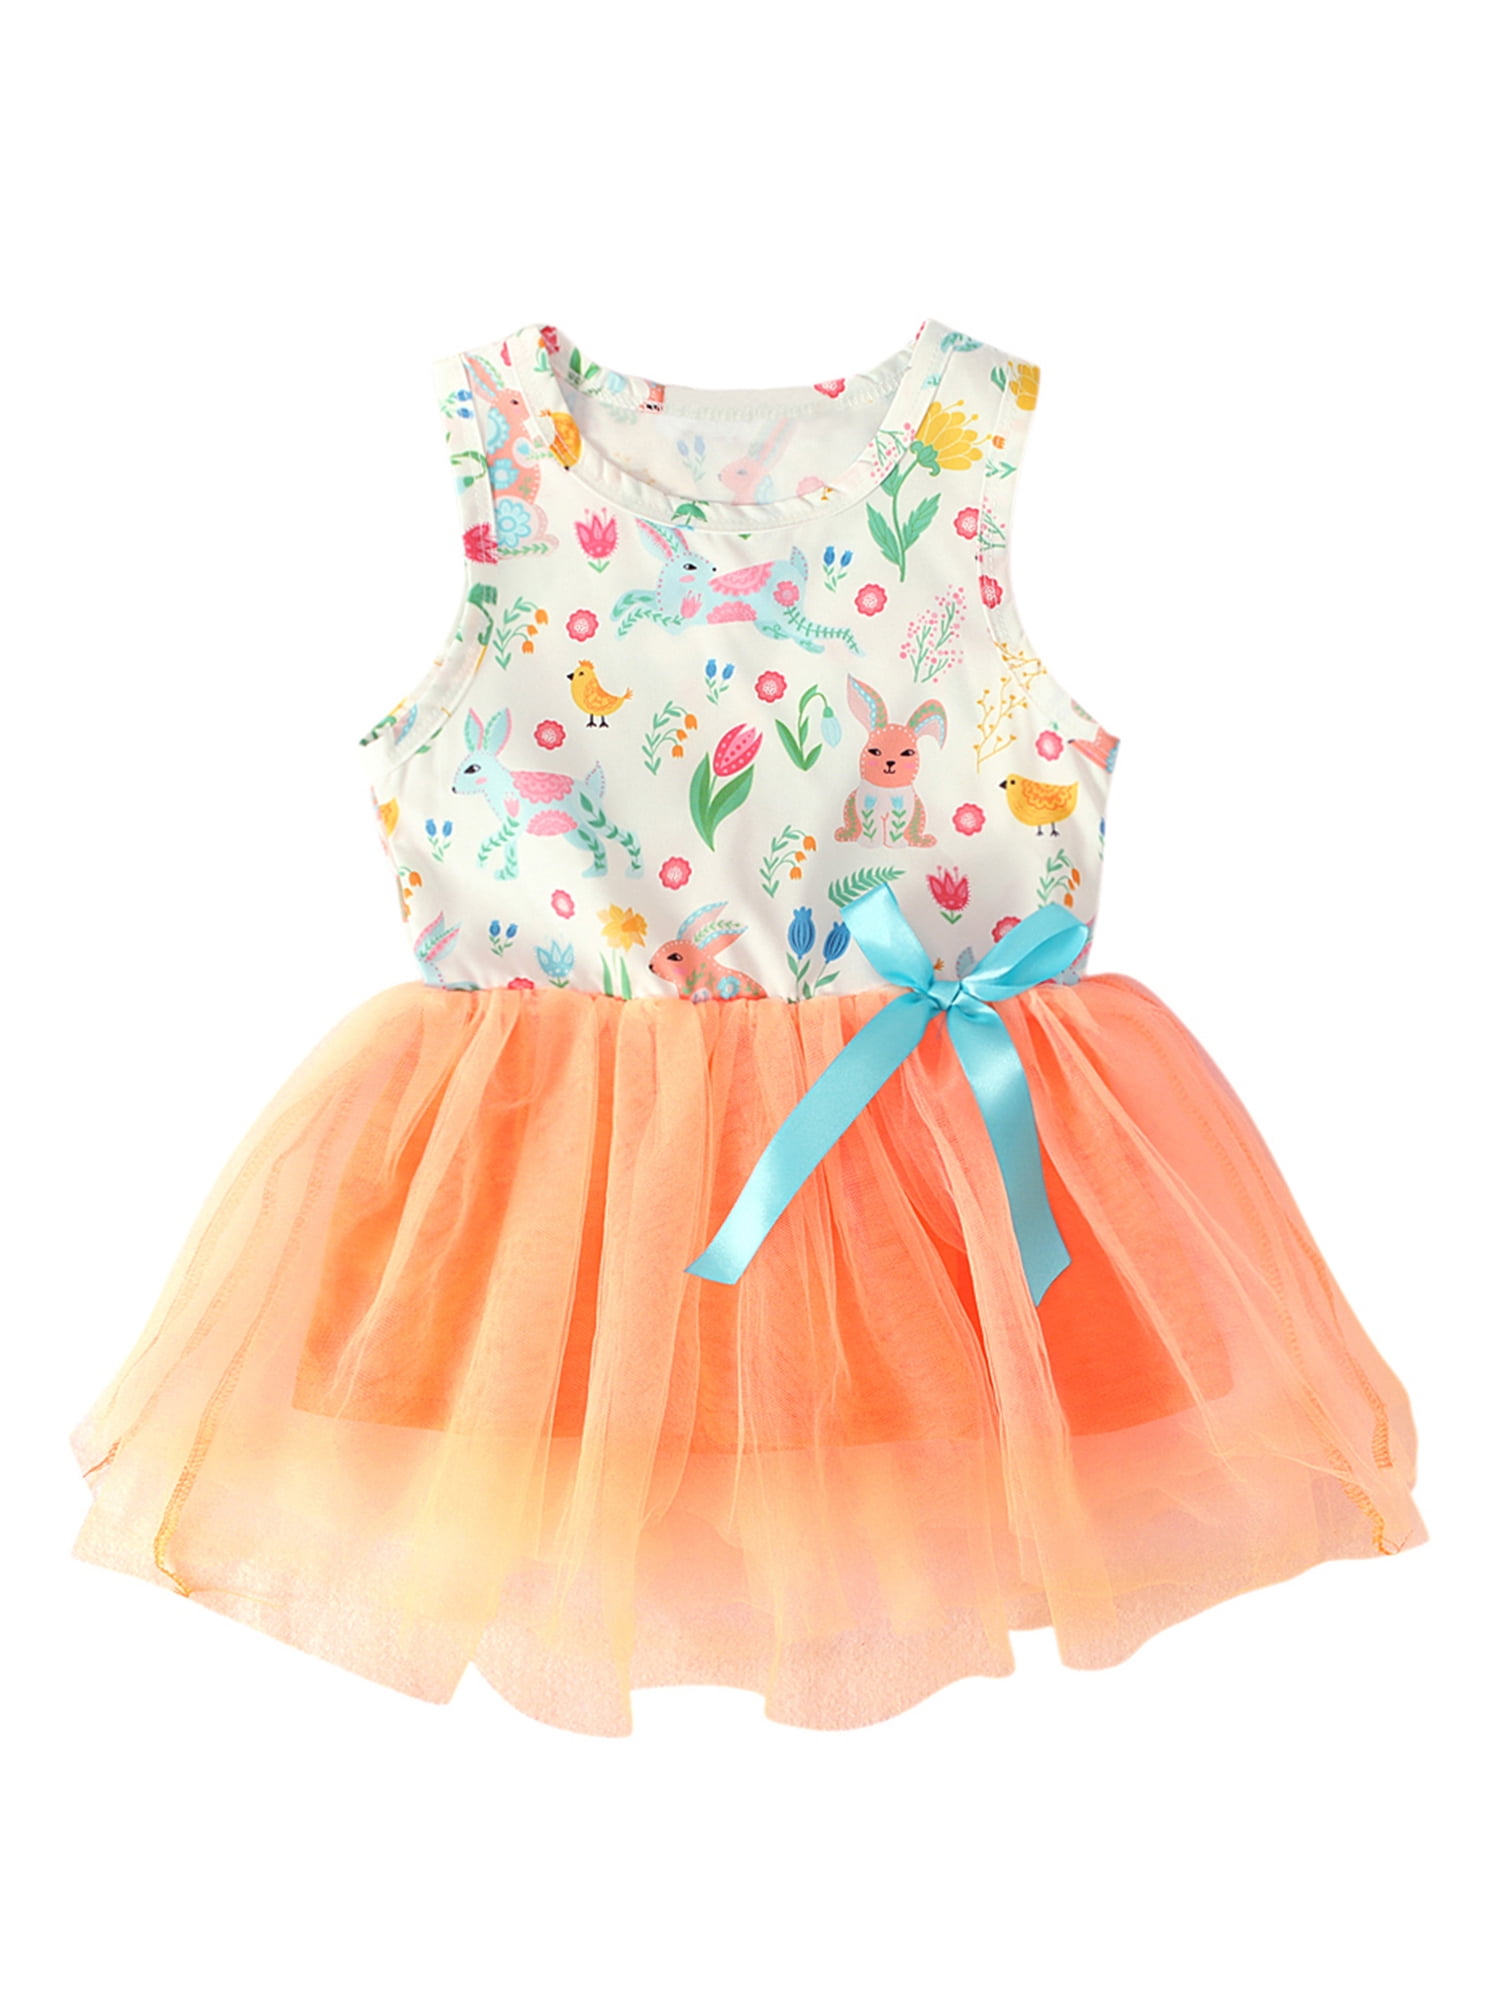 Lively Newborn Baby Girls Lovely Princess Party Dress Bowknot Party Tute Dress 